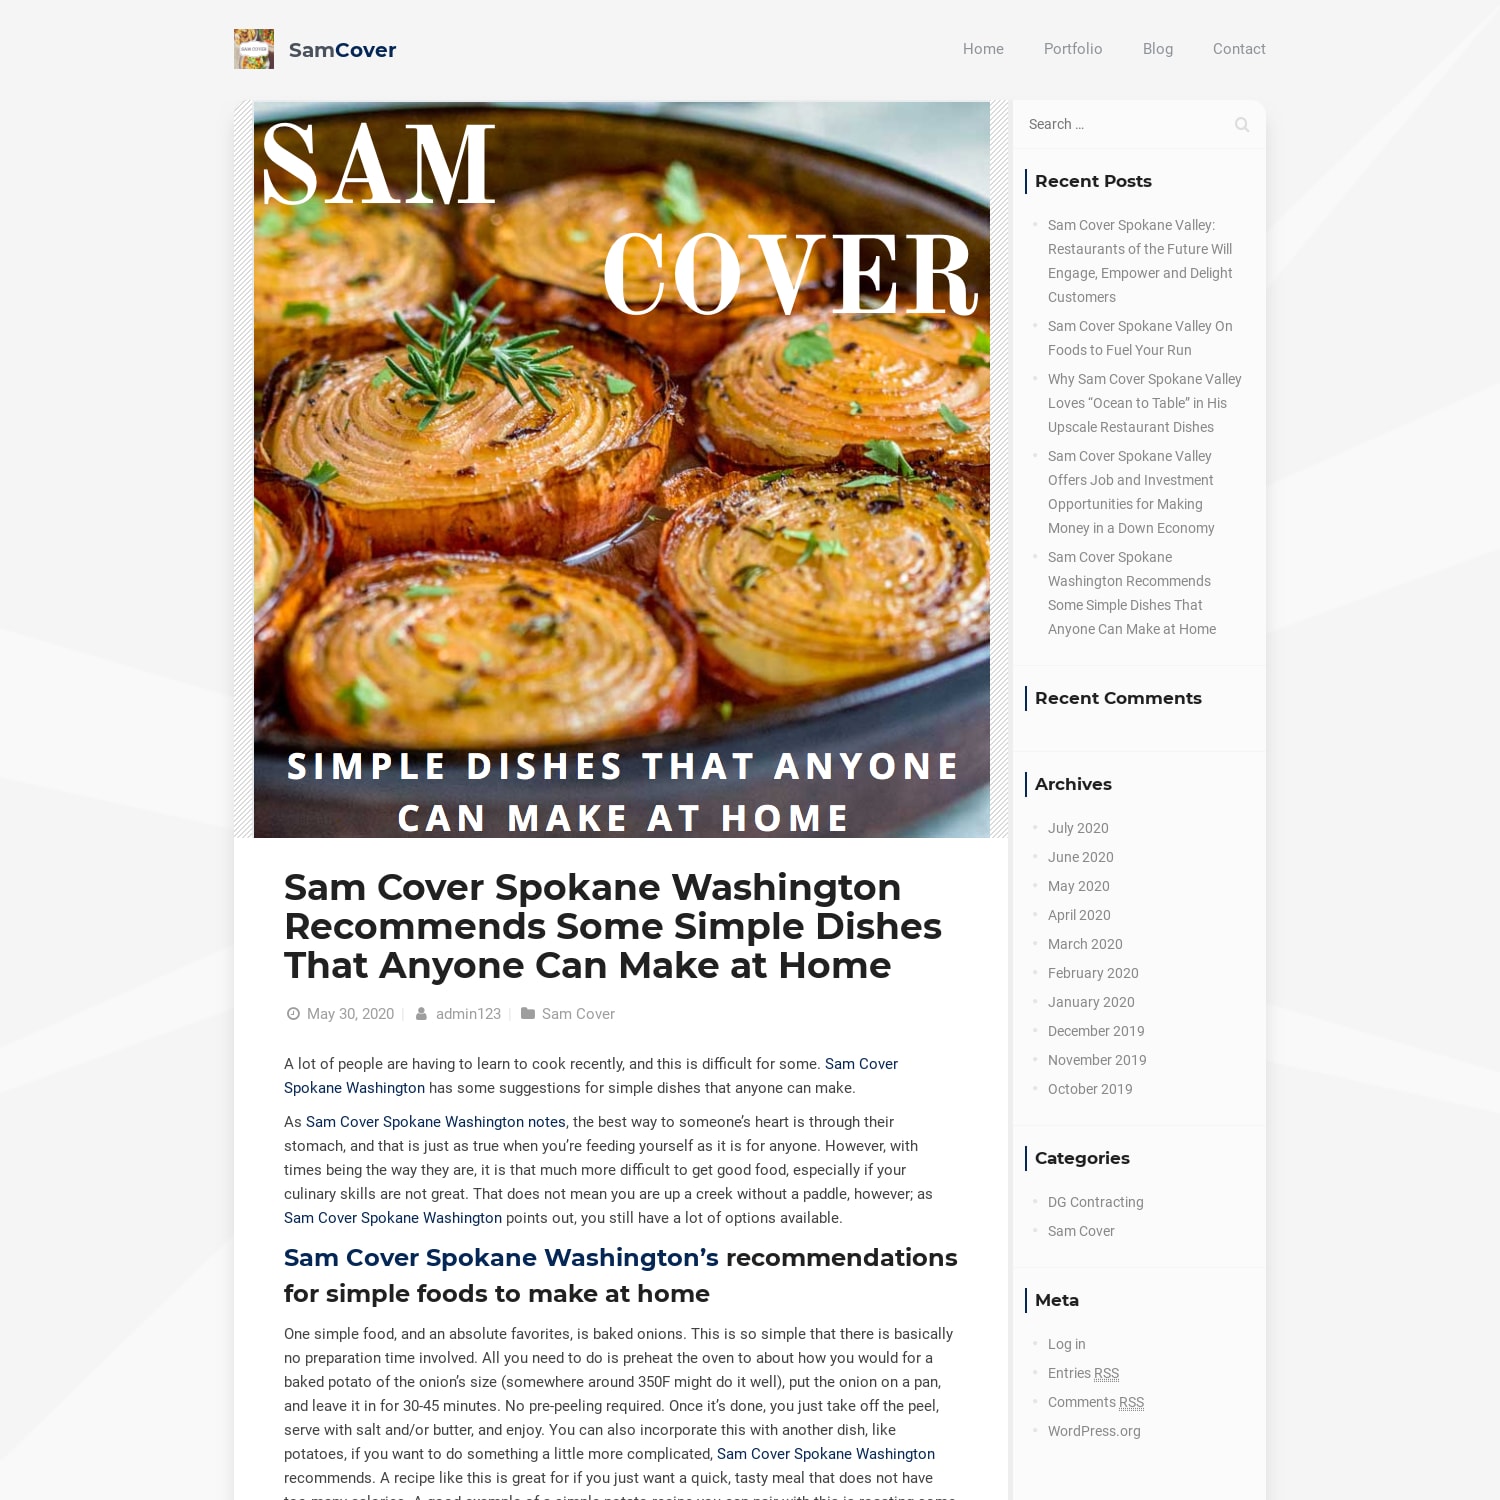 Sam Cover Spokane Washington Recommends Some Simple Dishes That Anyone Can Make at Home